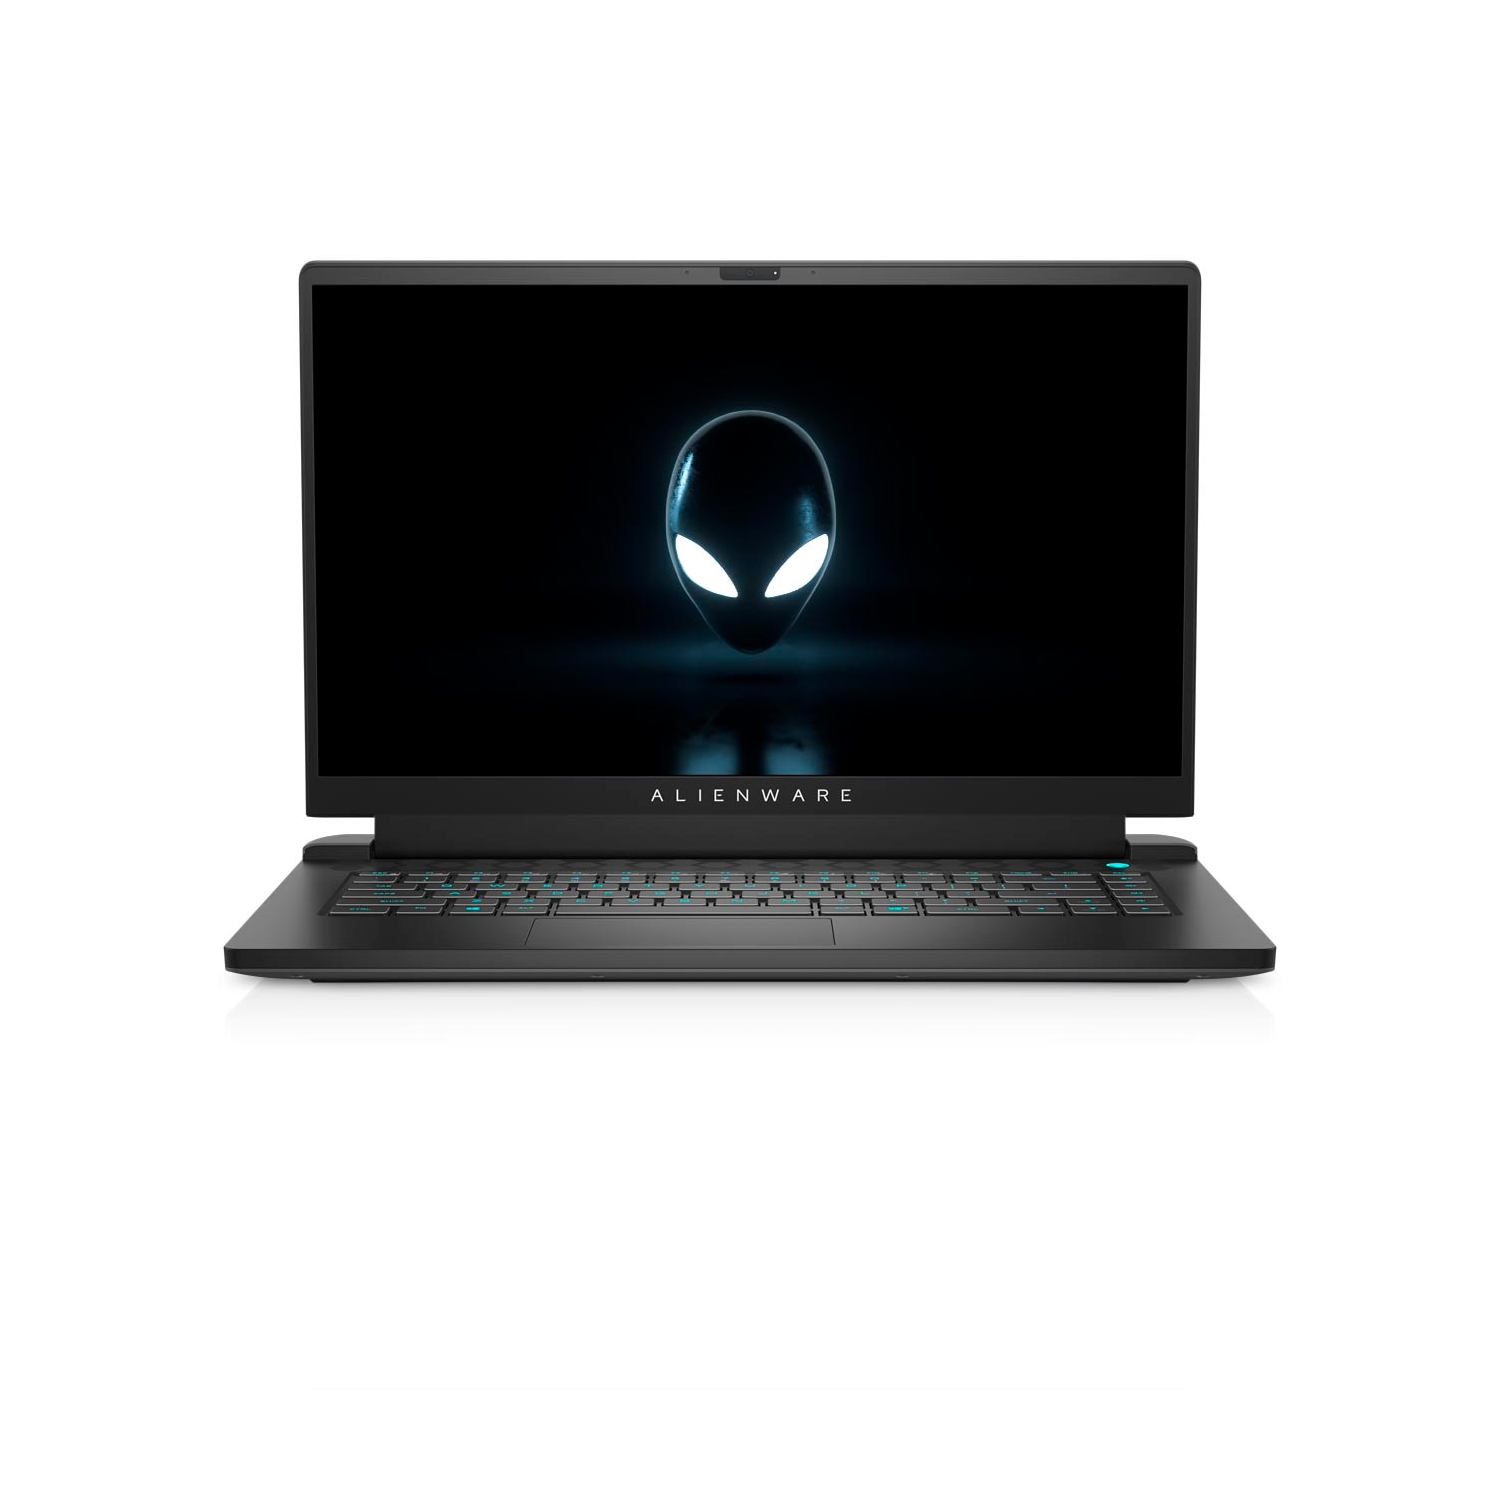 Refurbished (Excellent) - Dell Alienware m15 R5 Ryzen Edition Gaming Laptop (2021), 15.6" FHD, Core Ryzen 9, 1TB SSD, 16GB RAM, RTX 3070, 12 Cores @ 4.7 GHz Certified